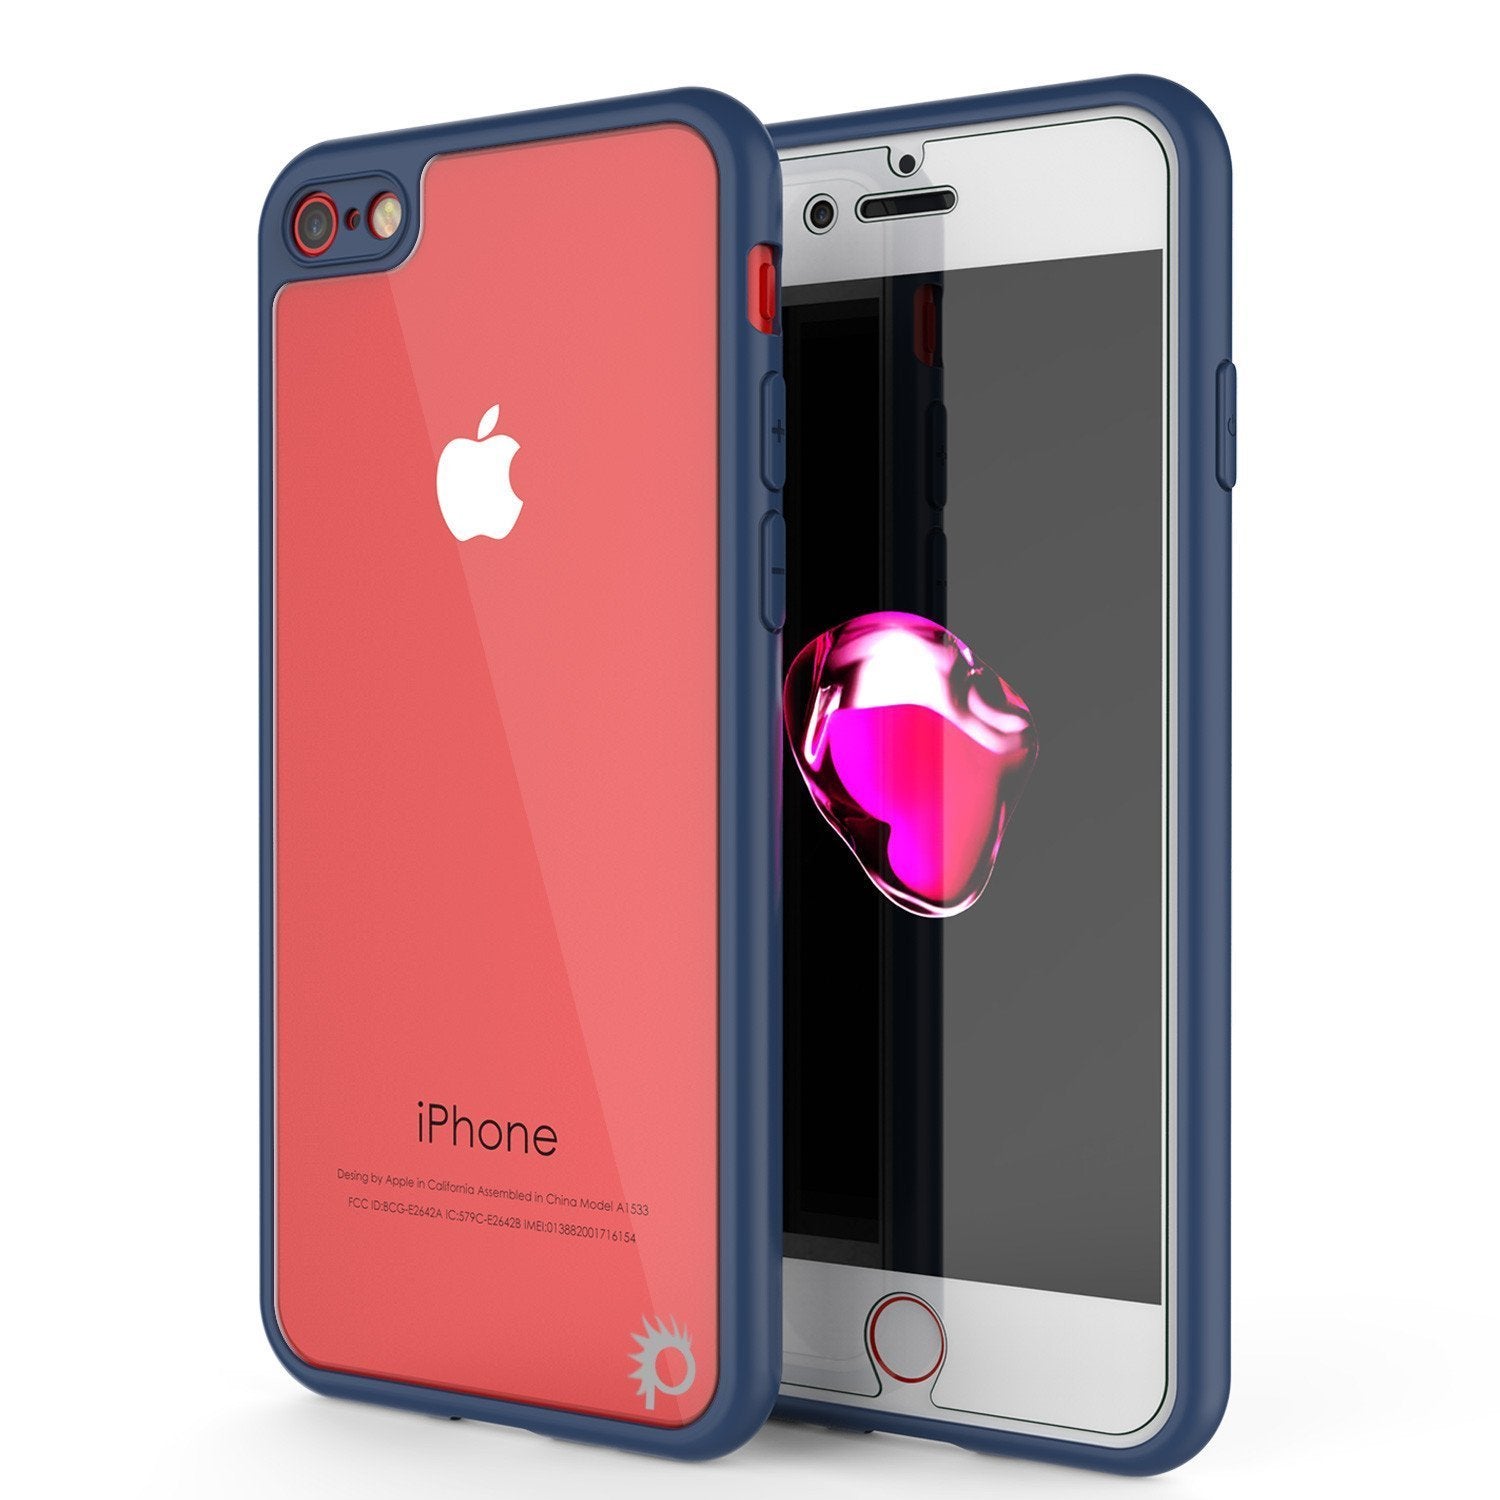 iPhone SE (4.7") Case [MASK Series] [NAVY] Full Body Hybrid Dual Layer TPU Cover W/ protective Tempered Glass Screen Protector